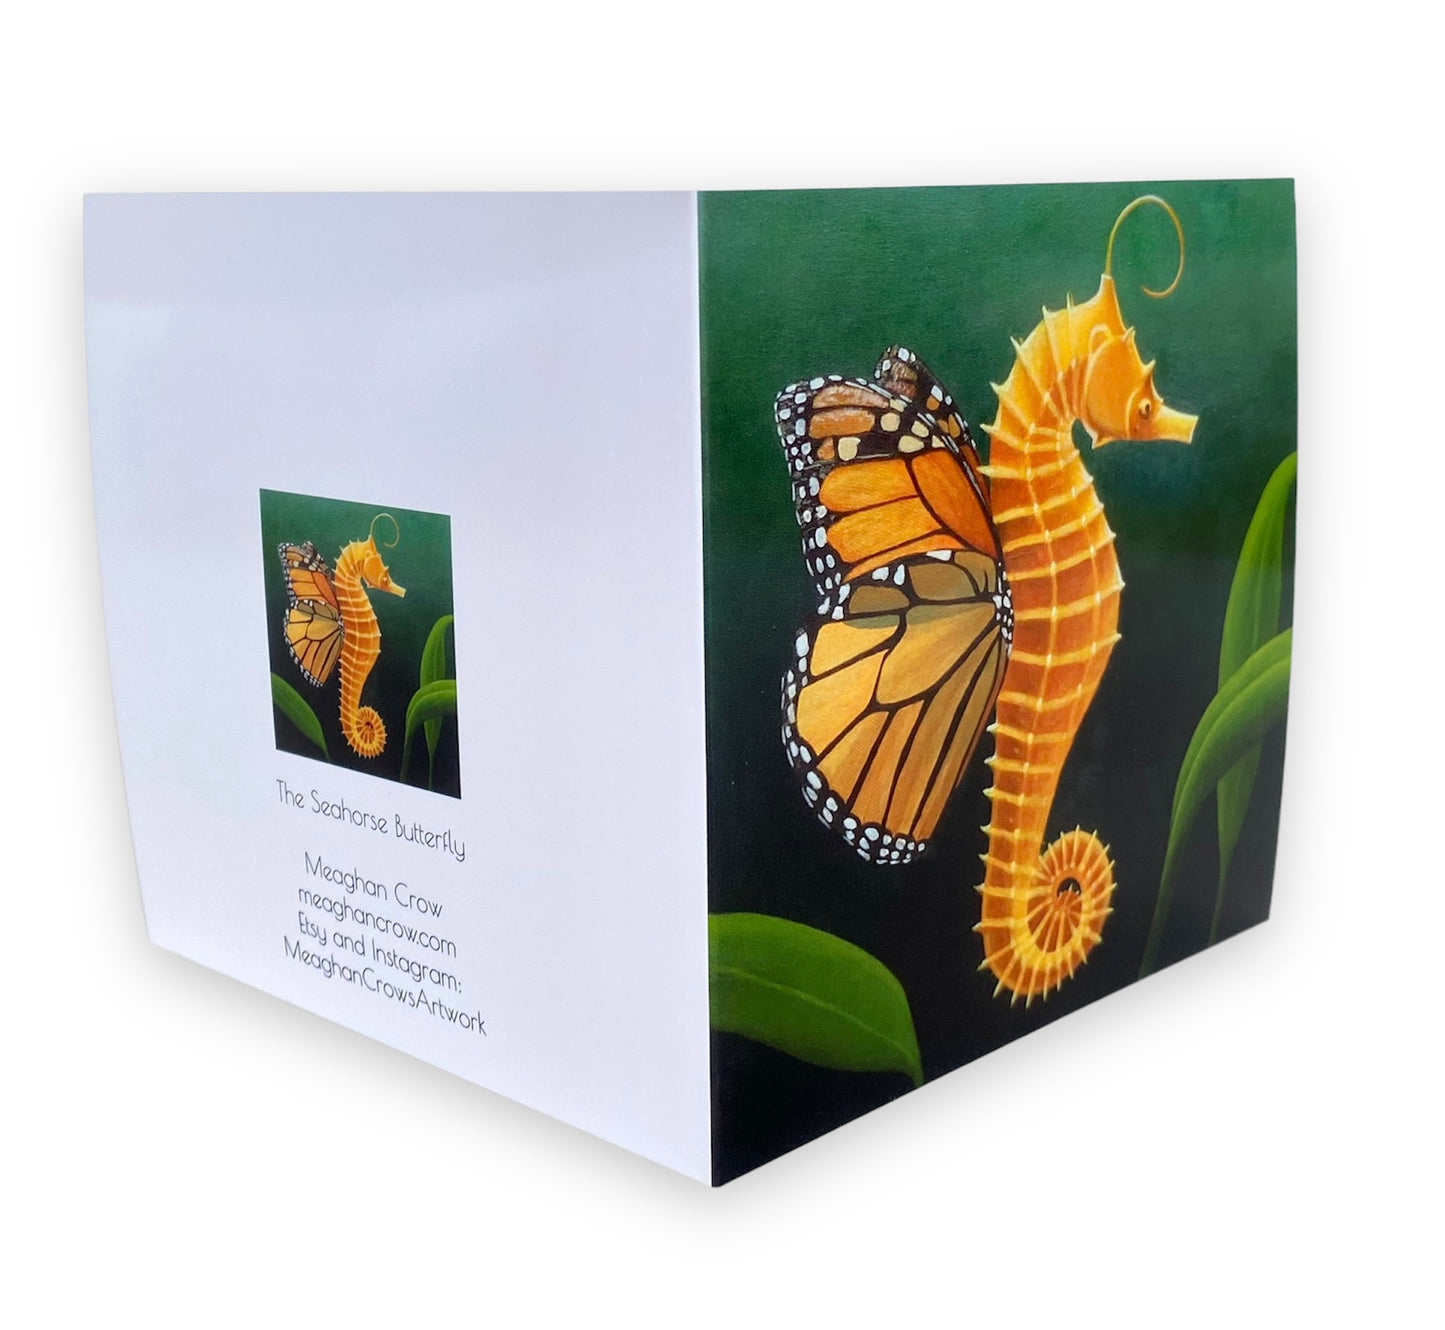 Seahorse Butterfly Art Card